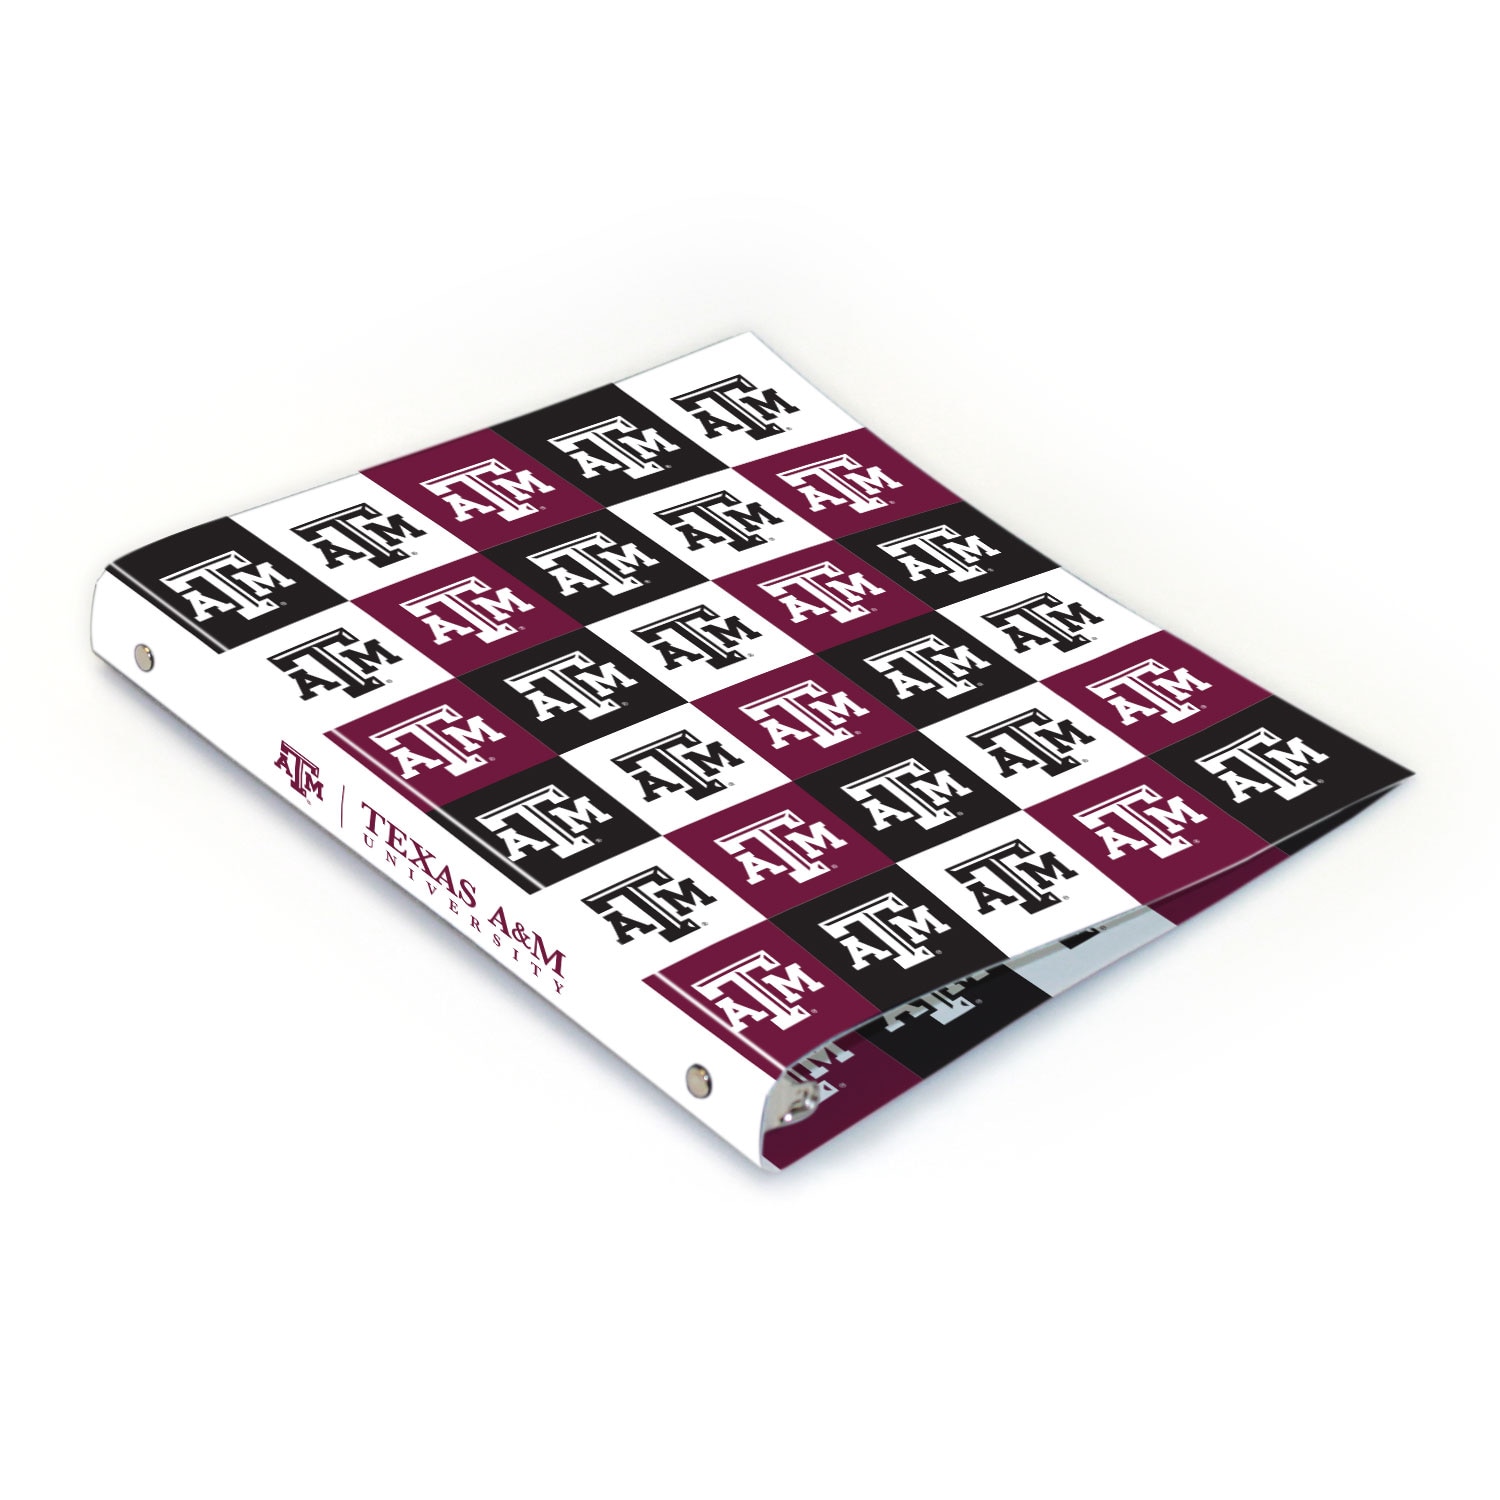 Texas A&M Full Color 2 sided Imprinted Flexible 1" Spirit 1 Binder 10.5" x 11.5"